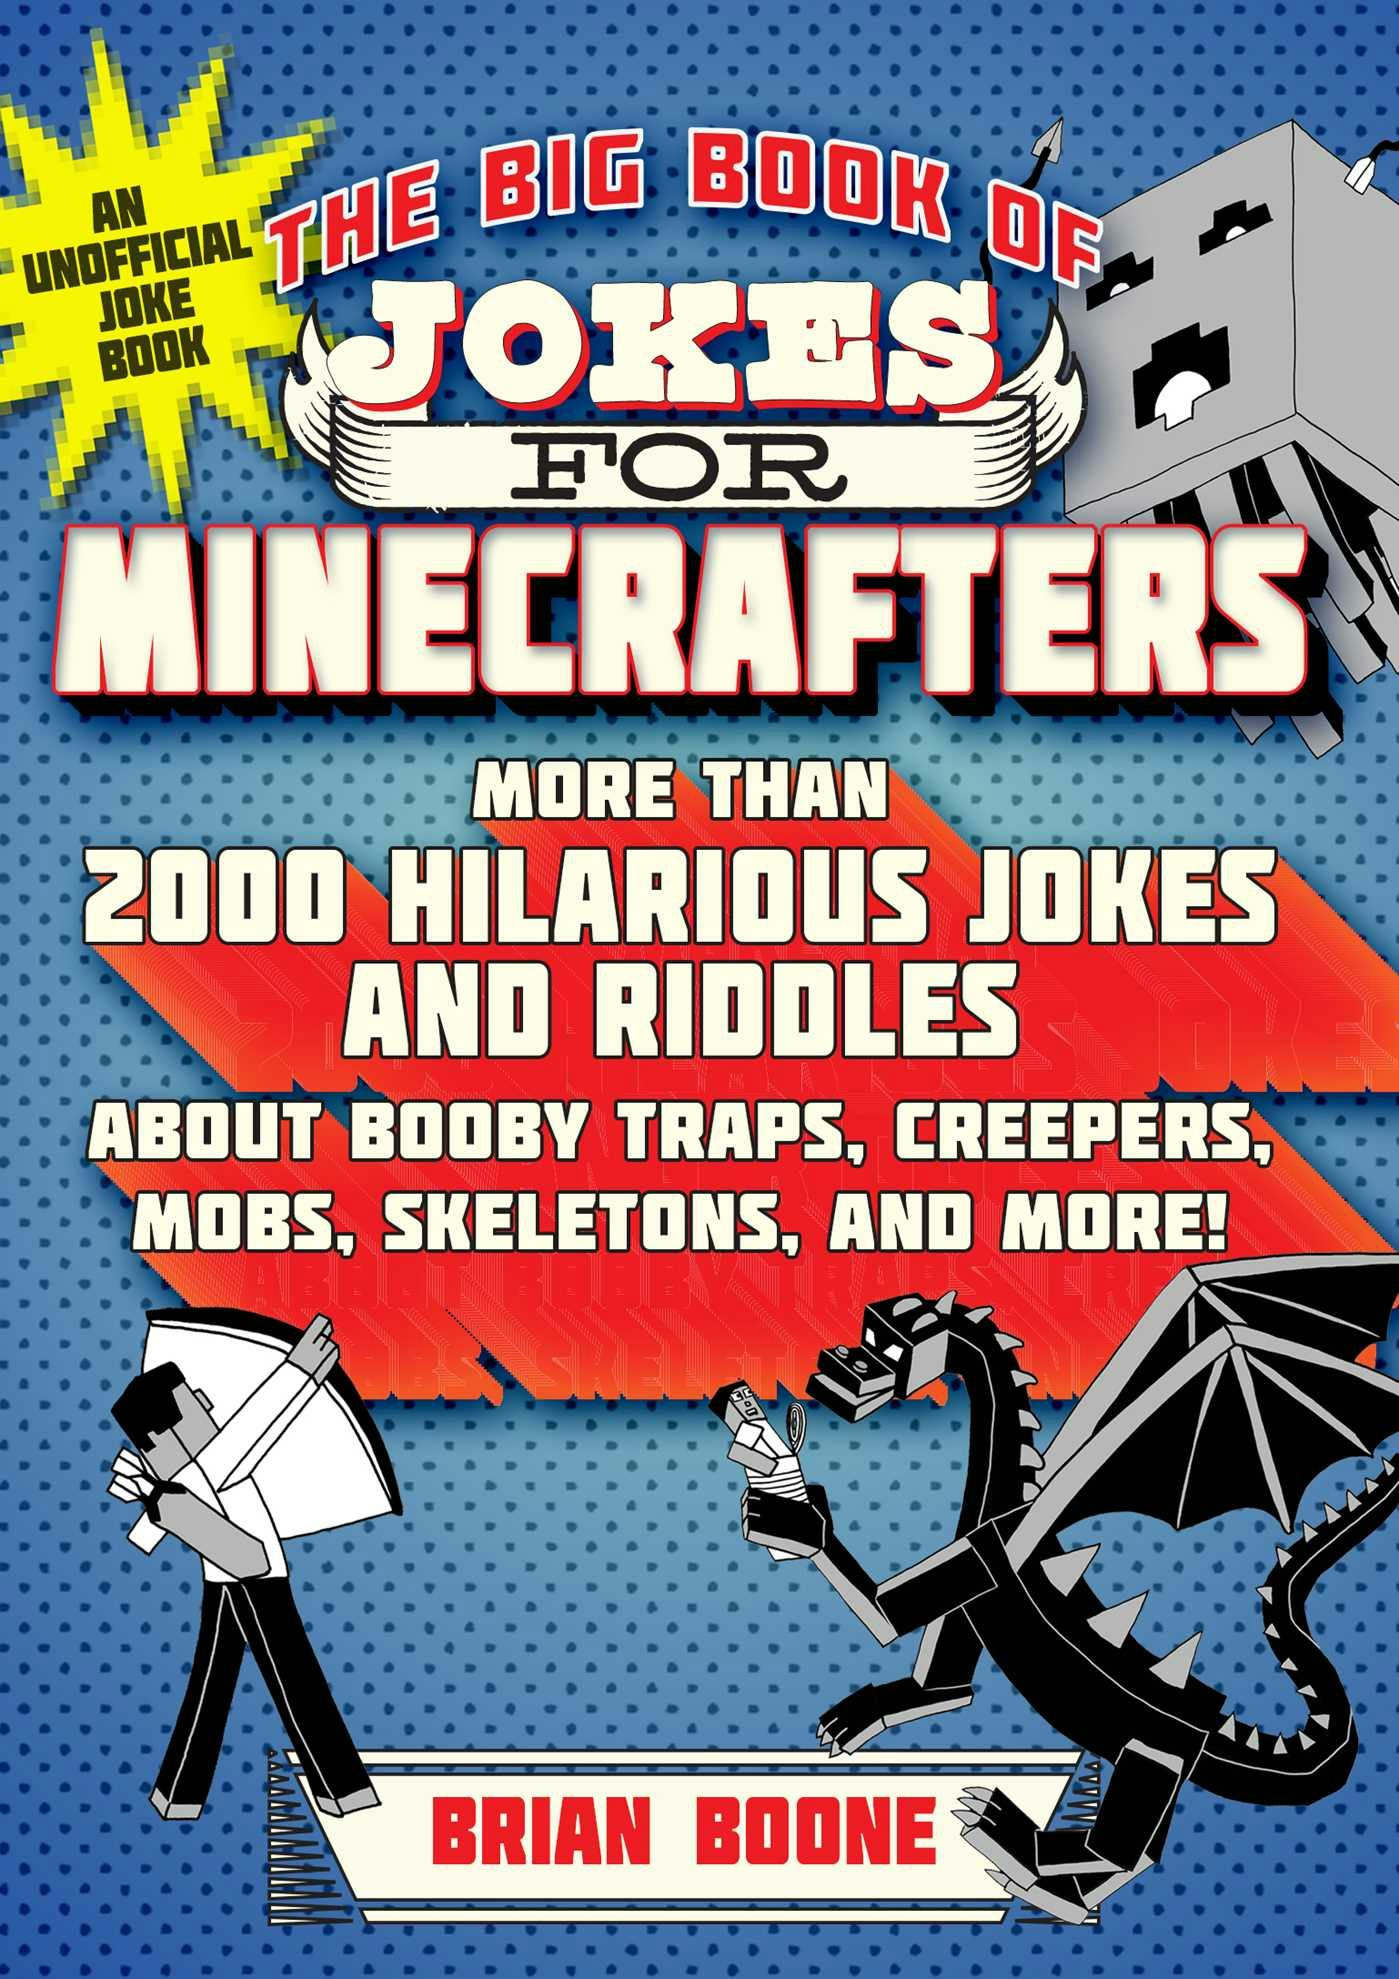 The Big Book of Jokes for Minecrafters: More Than 2000 Hilarious Jokes and Riddles about Booby Traps, Creepers, Mobs, Skeletons, and More! - Jordon P. Hollow, Brian Boone, Steven M. Hollow, Michele C. Hollow